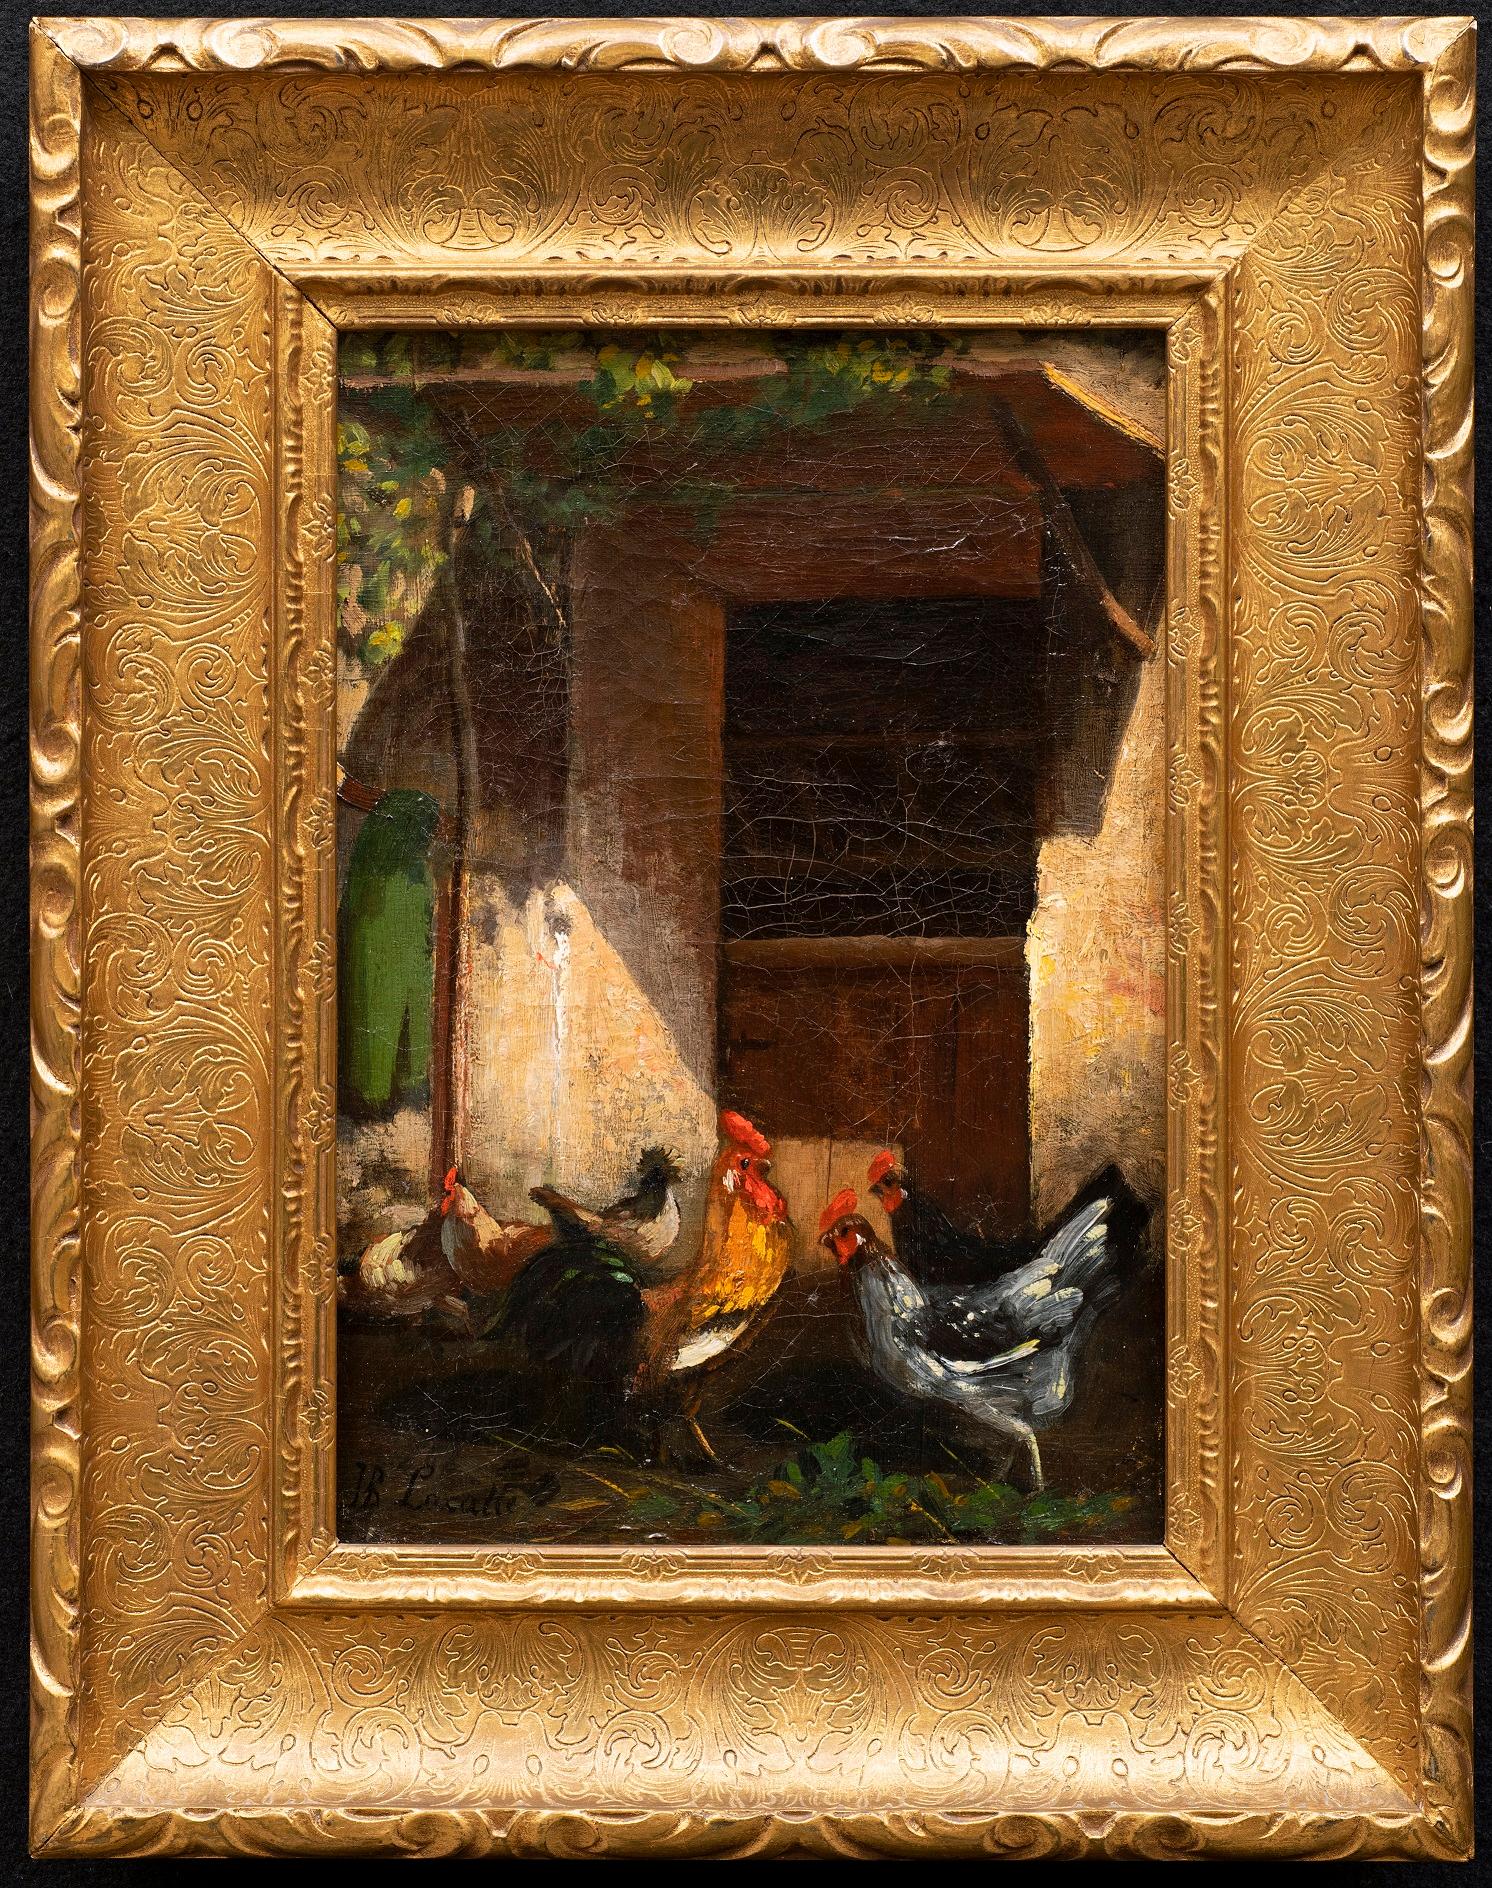 “A Rooster and Chickens in the Yard” Jacques Lacatte (France, 19th century)